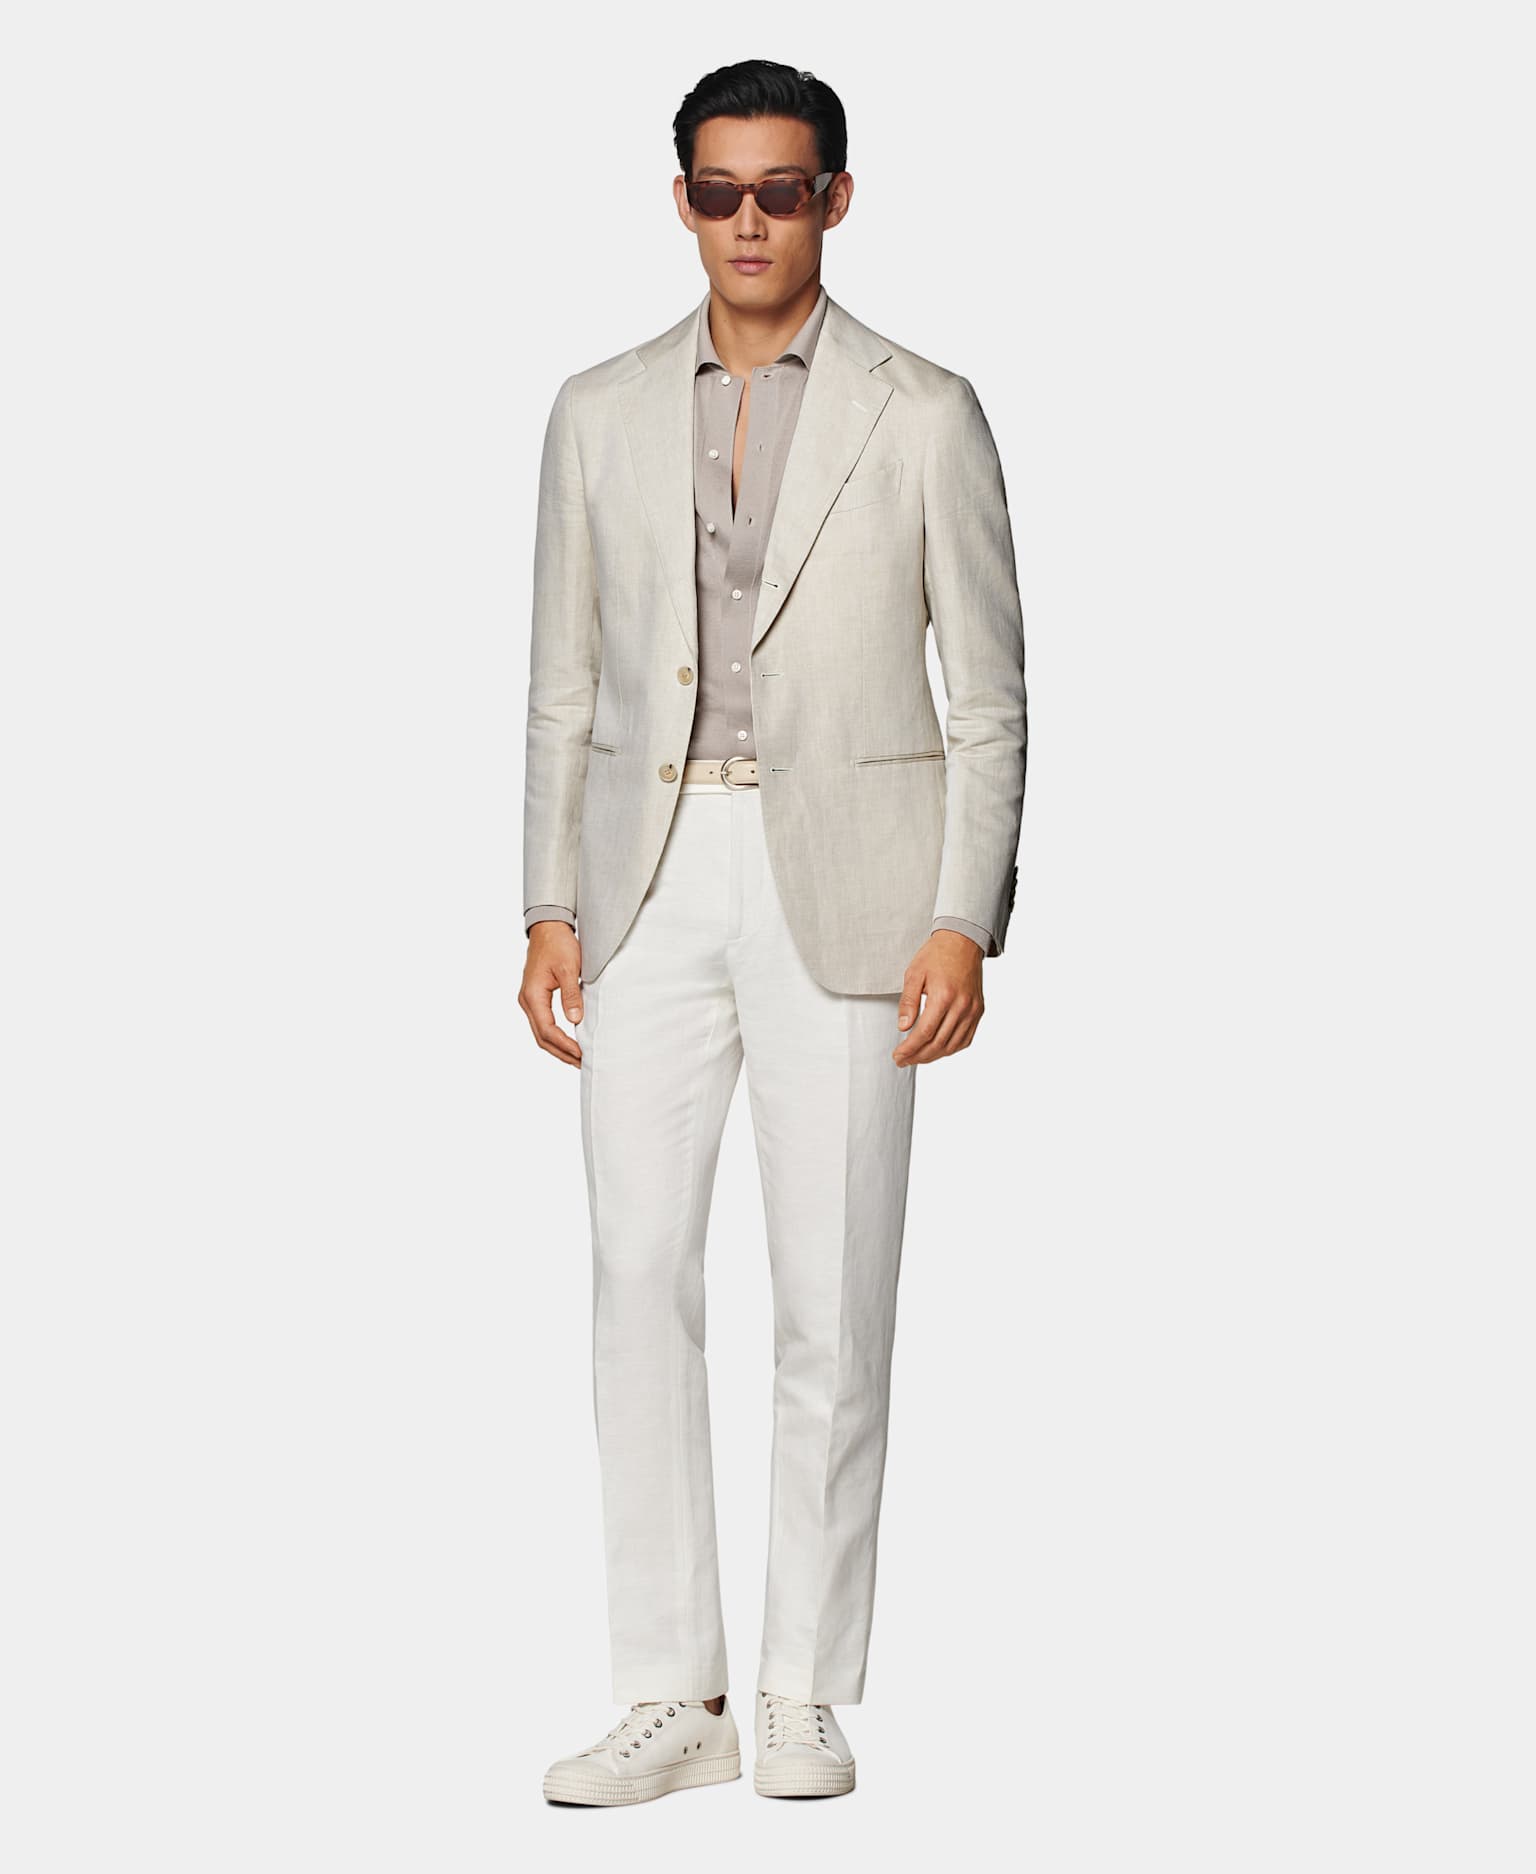 Light brown blazer with tauper shirt, tan belt, white trousers, and off-white canvas sneakers.